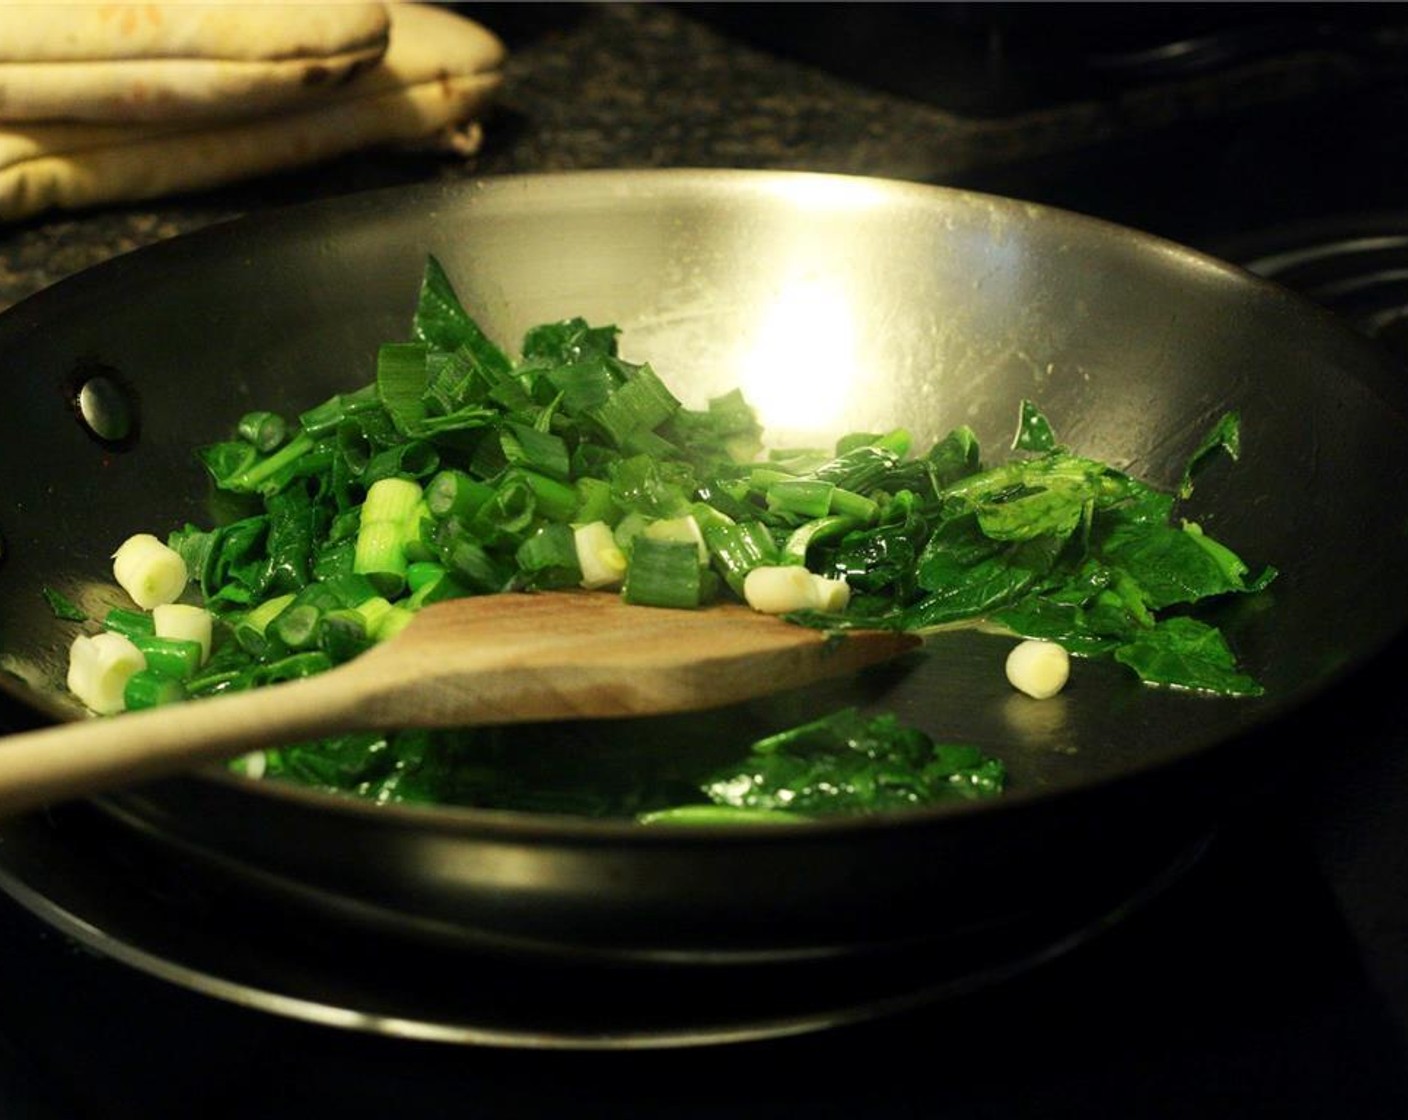 step 5 Heat a 10-inch oven-safe frying pan over medium heat. Add Butter (1 Tbsp) and tilt the pan until butter coats the bottom. Cook spinach for 2-3 minutes until it has wilted and collapsed in size. Add scallions and cook for 2-3 more minutes.